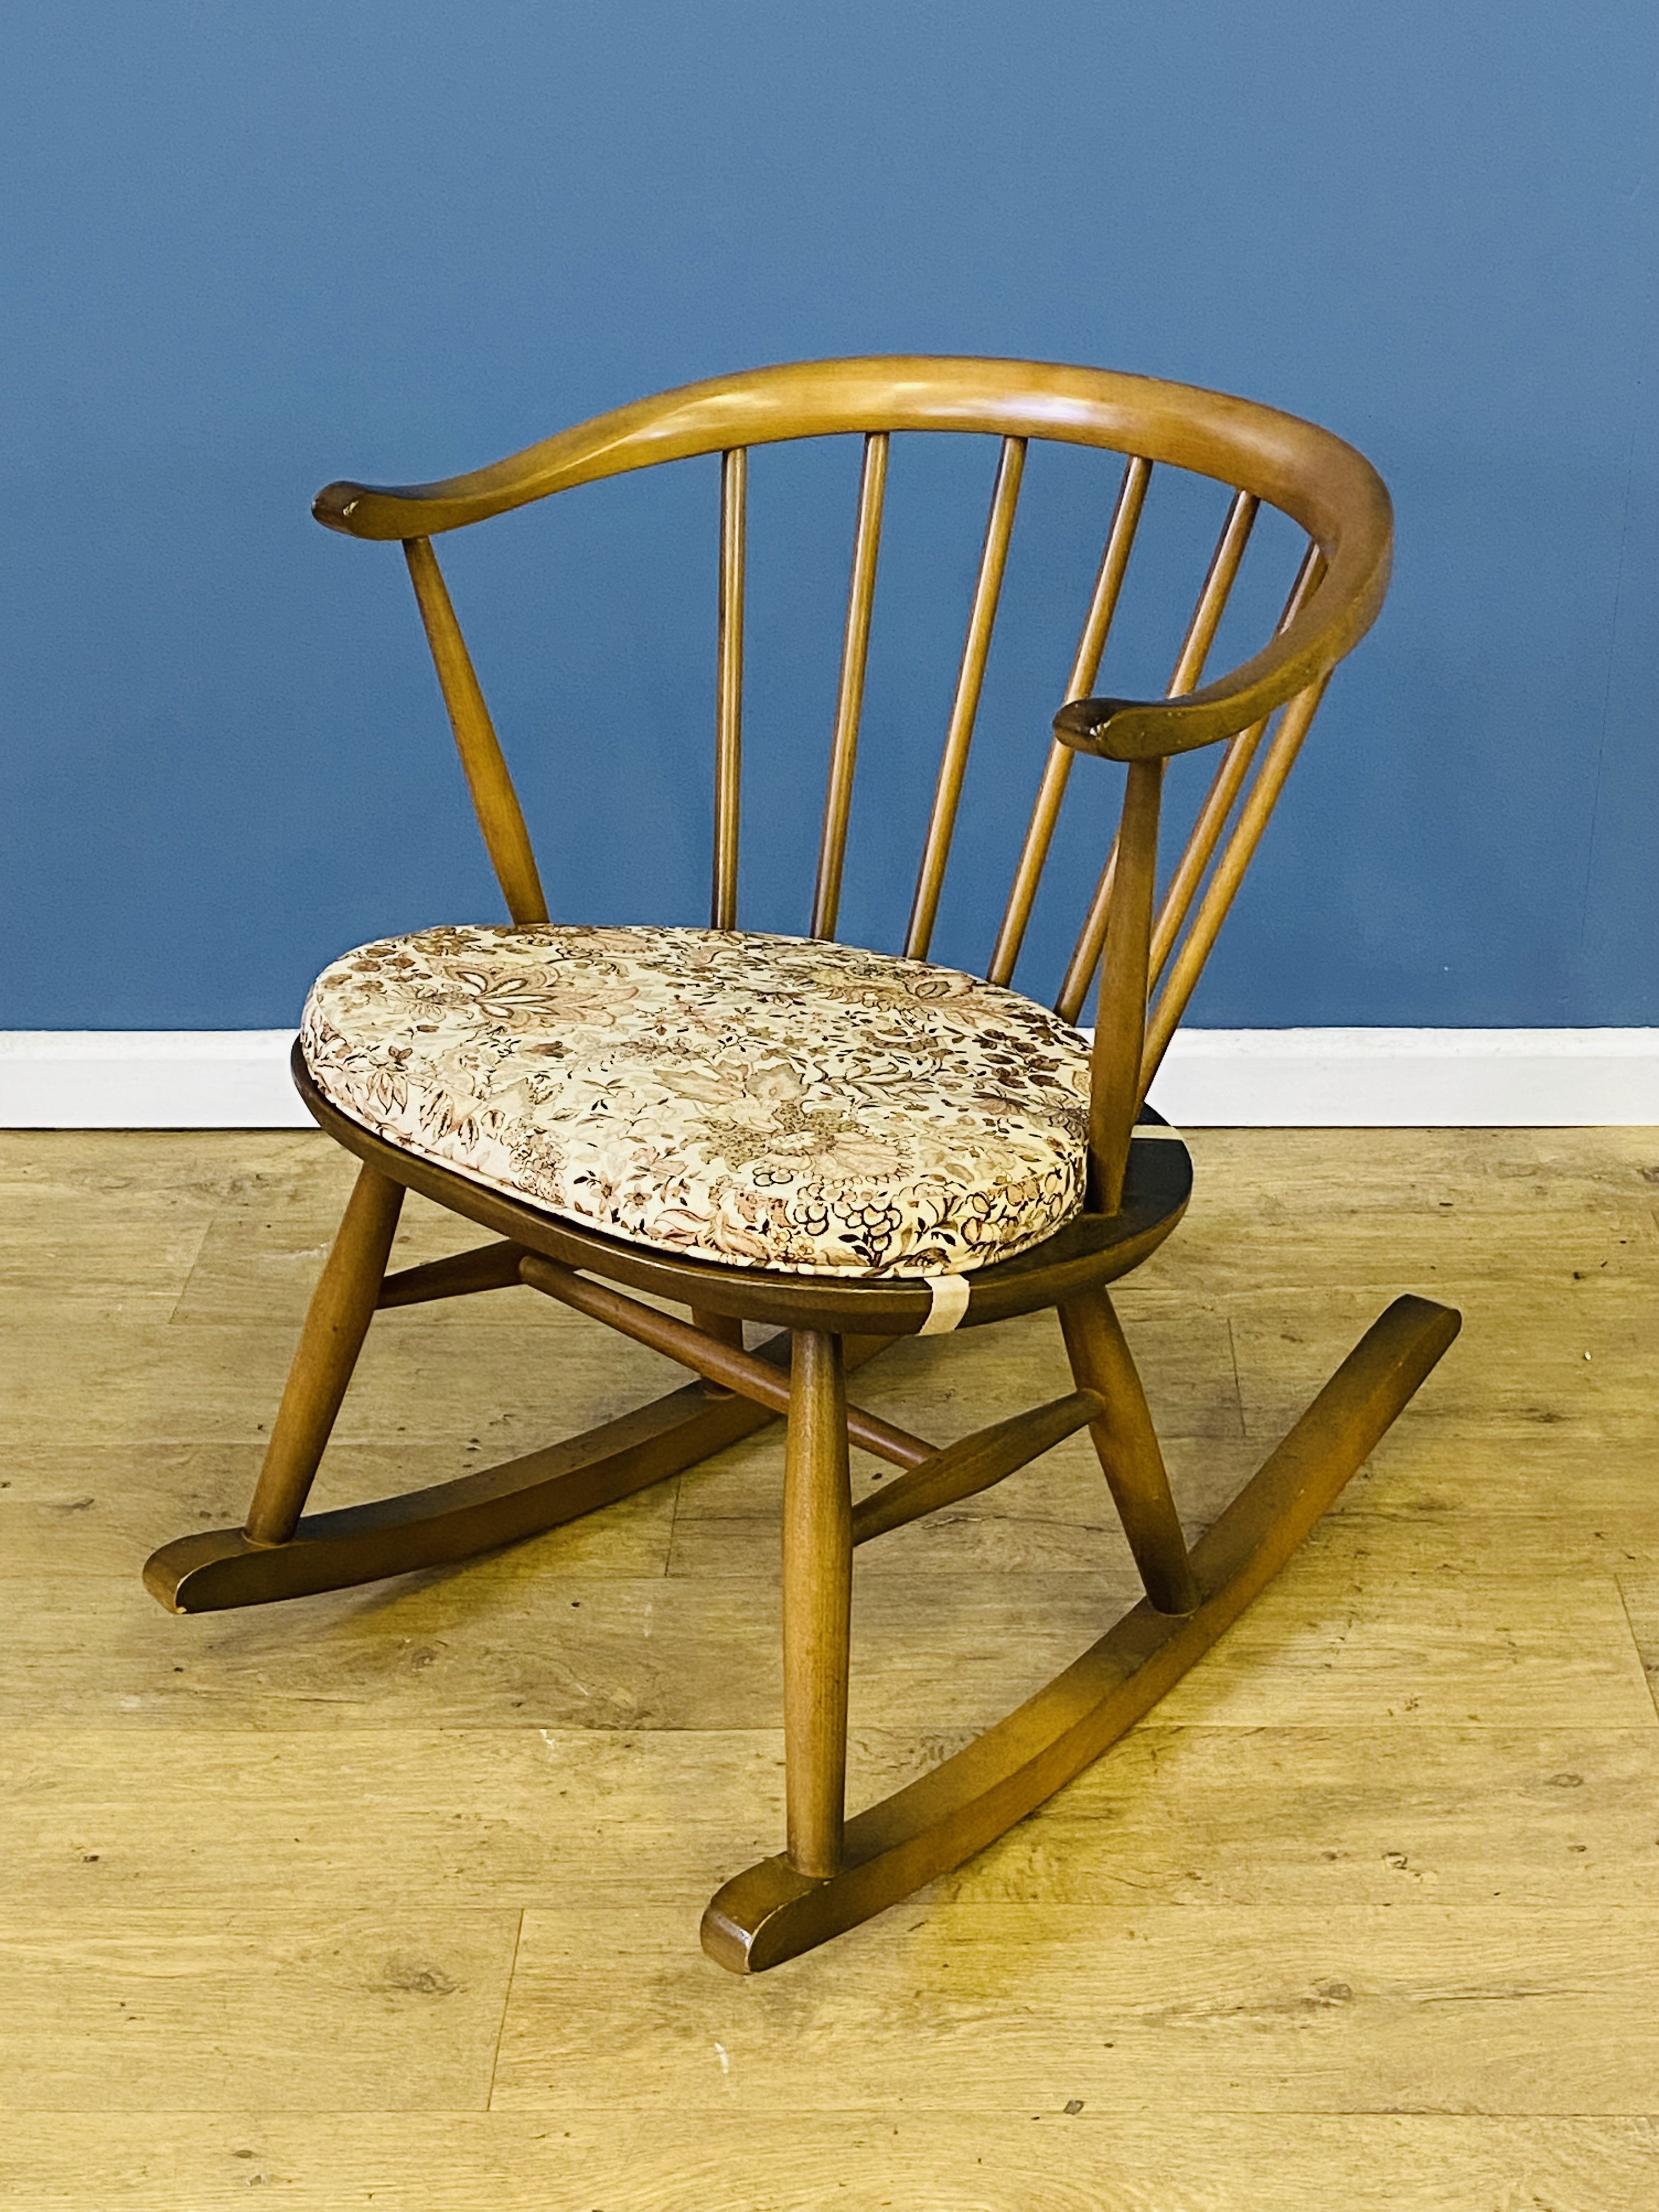 Ercol style rocking chair - Image 2 of 4